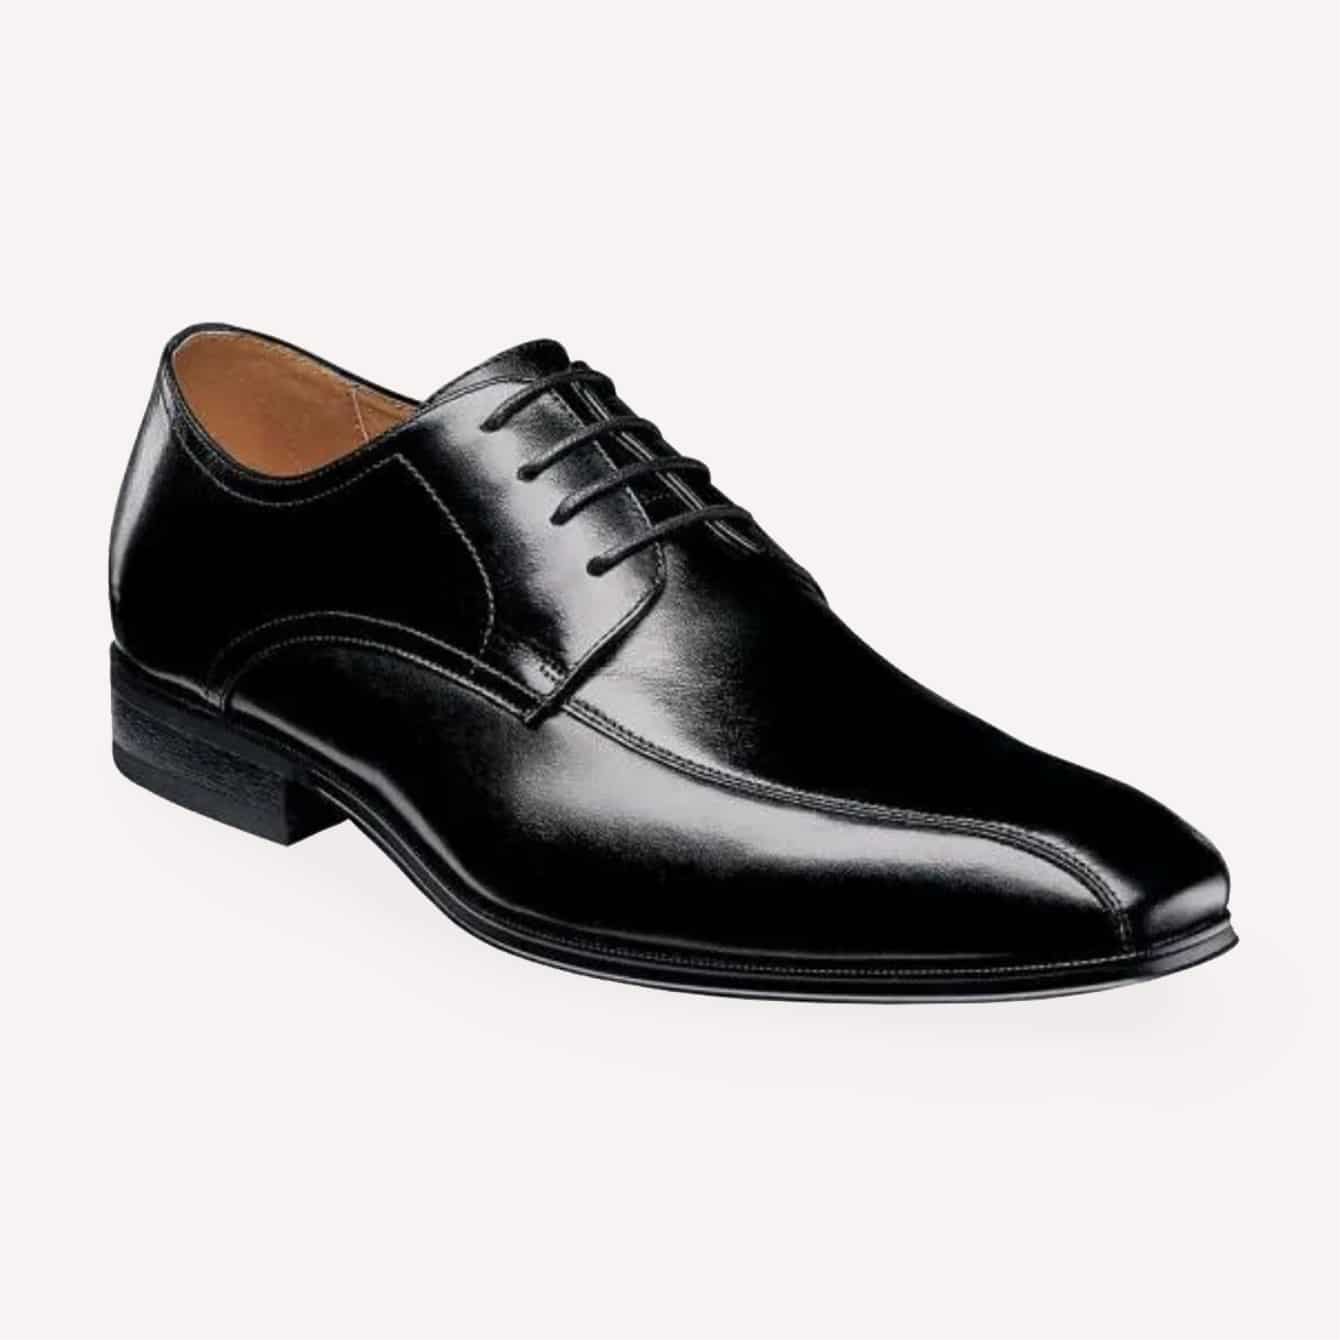 inexpensive dress shoes